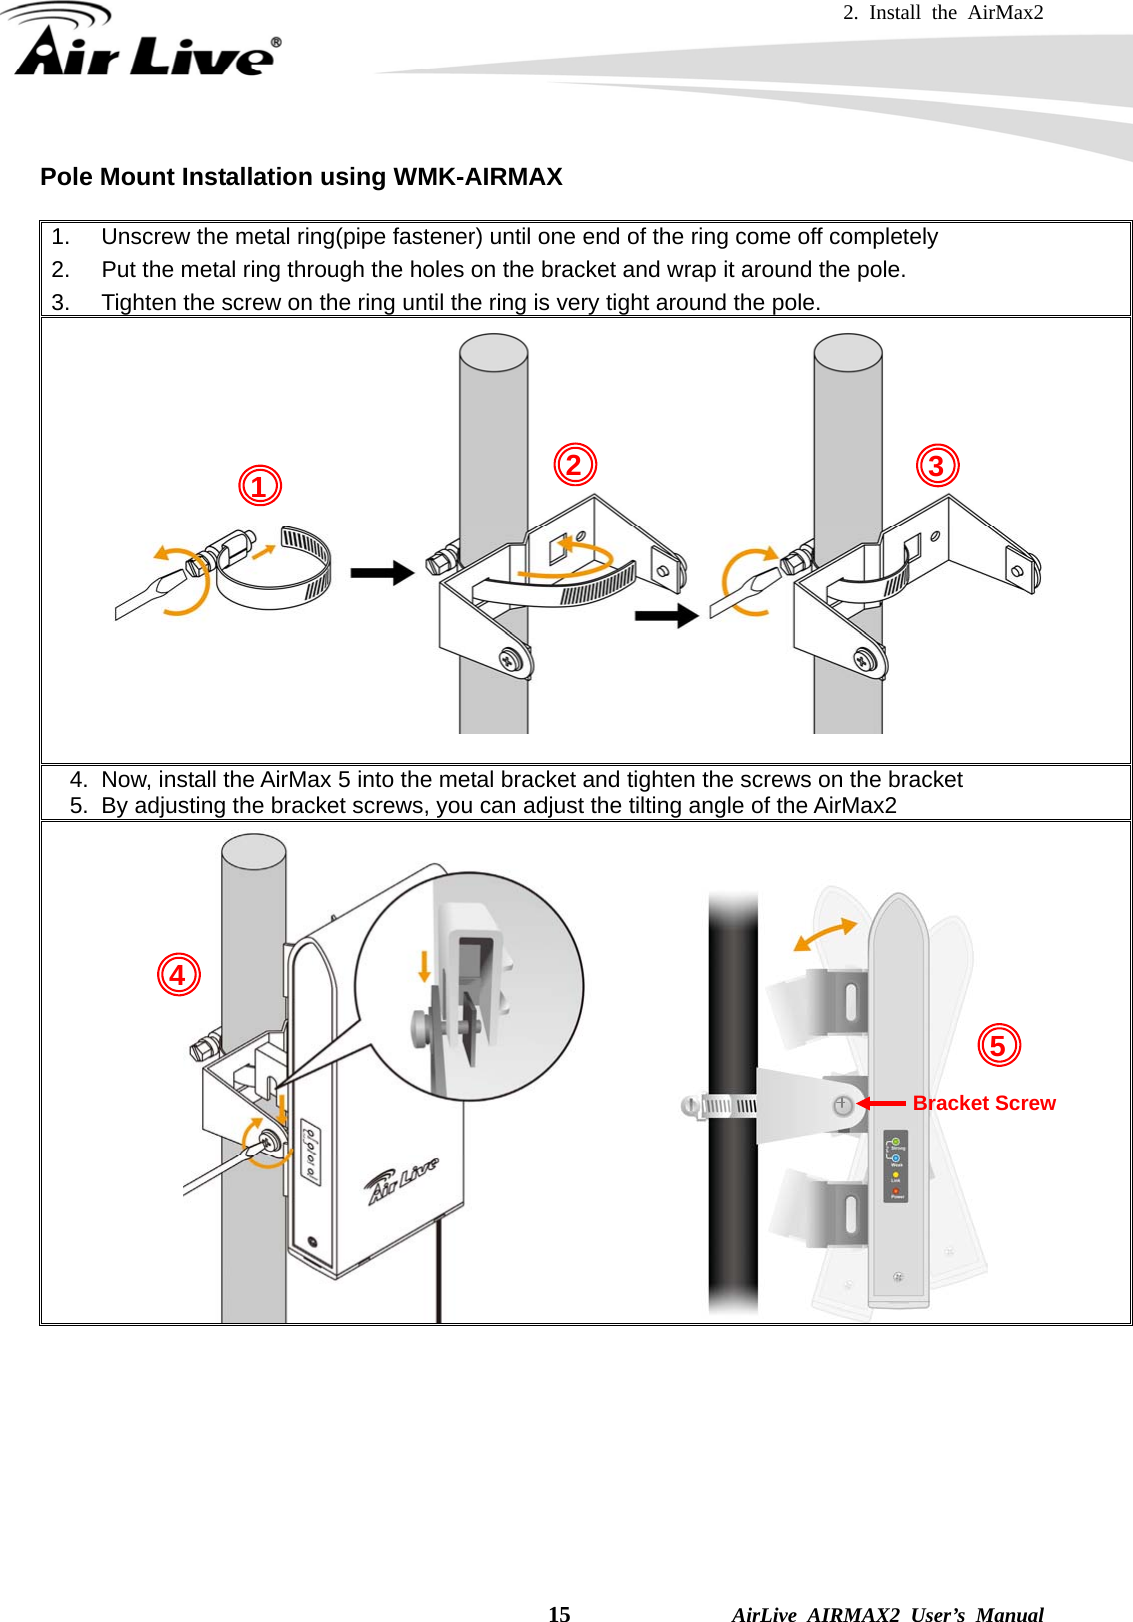 2. Install the AirMax2   15              AirLive AIRMAX2 User’s Manual Pole Mount Installation using WMK-AIRMAX  1.  Unscrew the metal ring(pipe fastener) until one end of the ring come off completely   2.  Put the metal ring through the holes on the bracket and wrap it around the pole. 3.  Tighten the screw on the ring until the ring is very tight around the pole.   4.  Now, install the AirMax 5 into the metal bracket and tighten the screws on the bracket   5.  By adjusting the bracket screws, you can adjust the tilting angle of the AirMax2               Bracket Screw 1  24 3 5